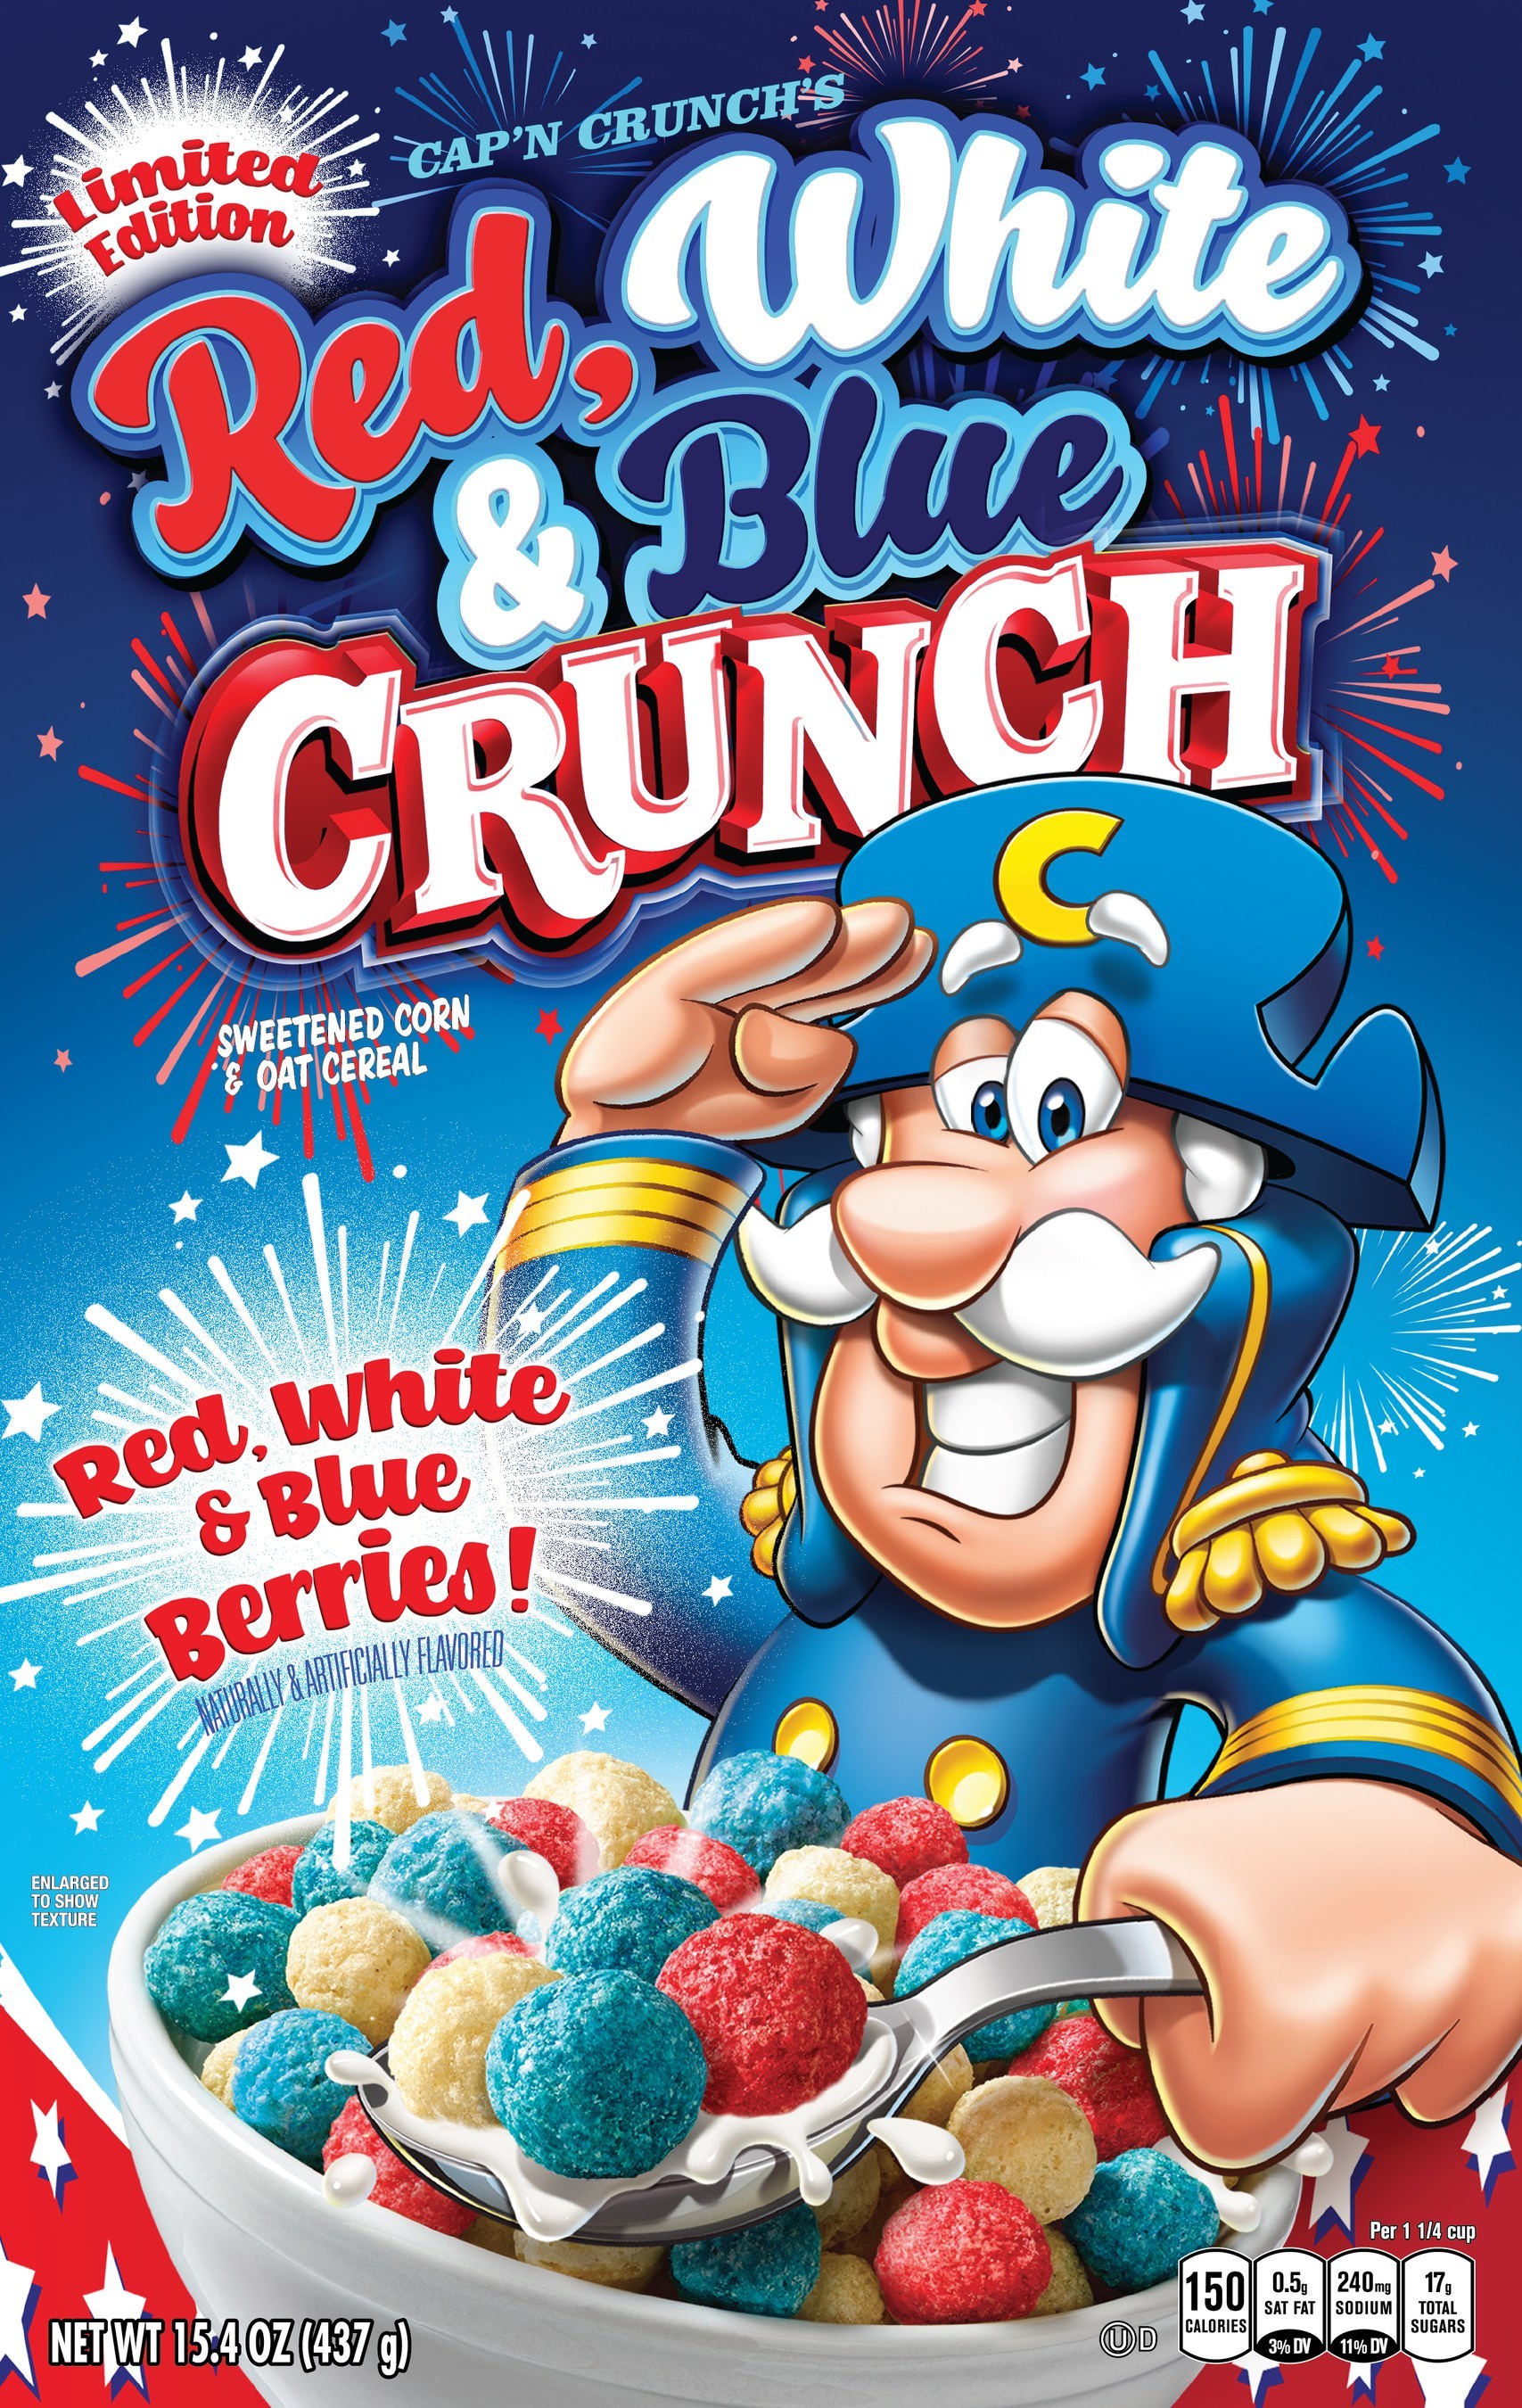 Expired staff Infidelity Cap'n Crunch Expands Fleet of Flavors with Tw...